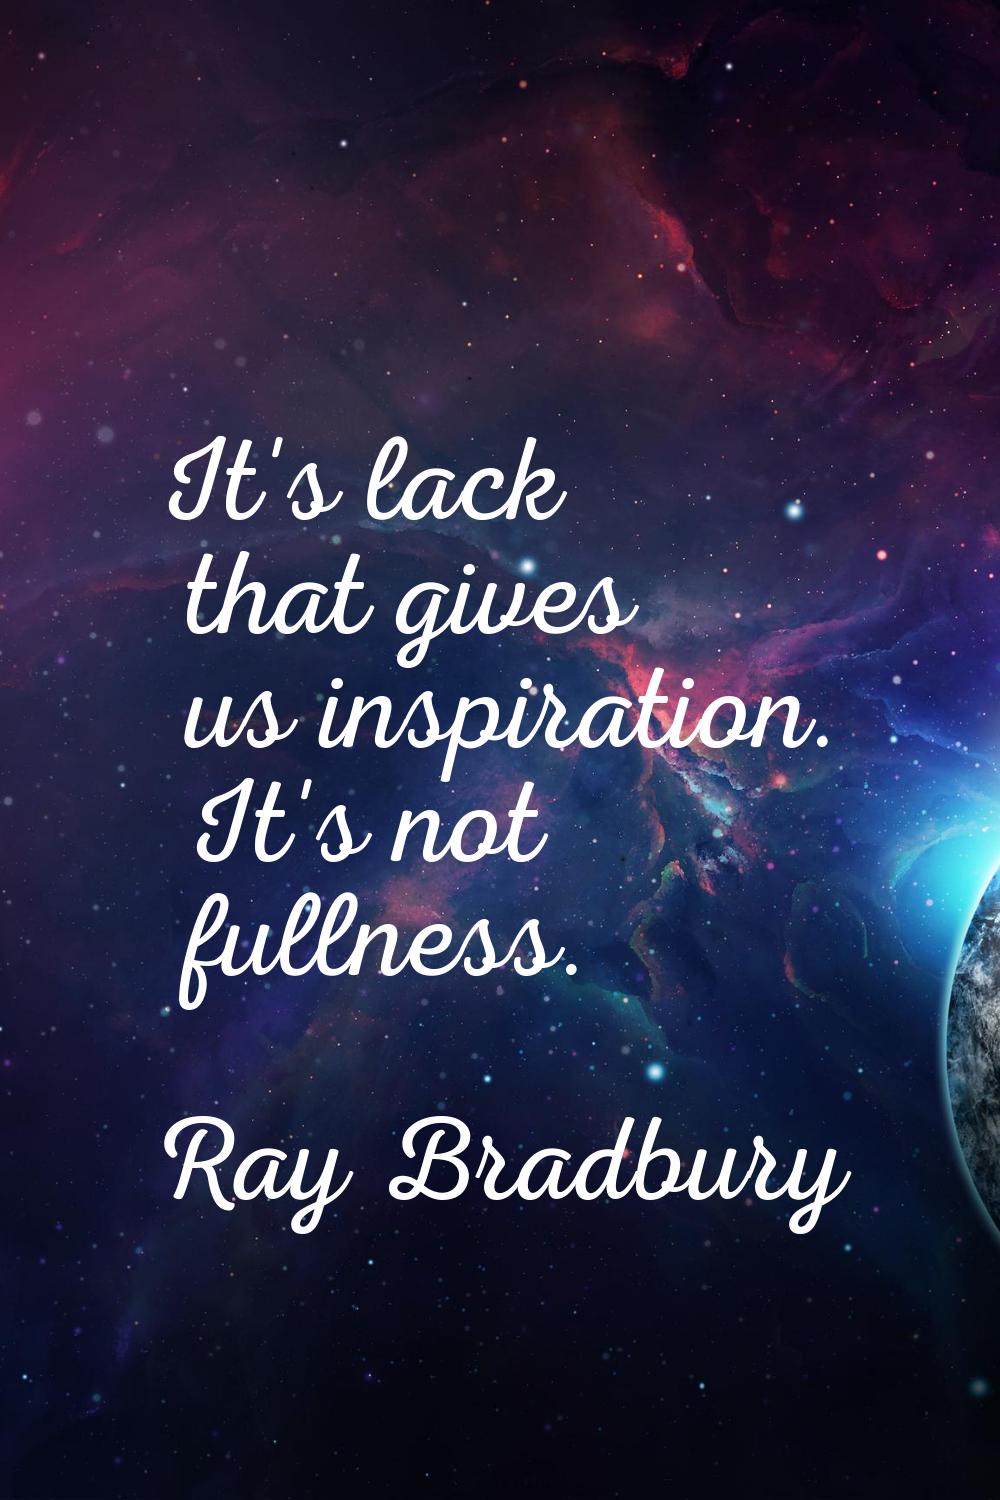 It's lack that gives us inspiration. It's not fullness.